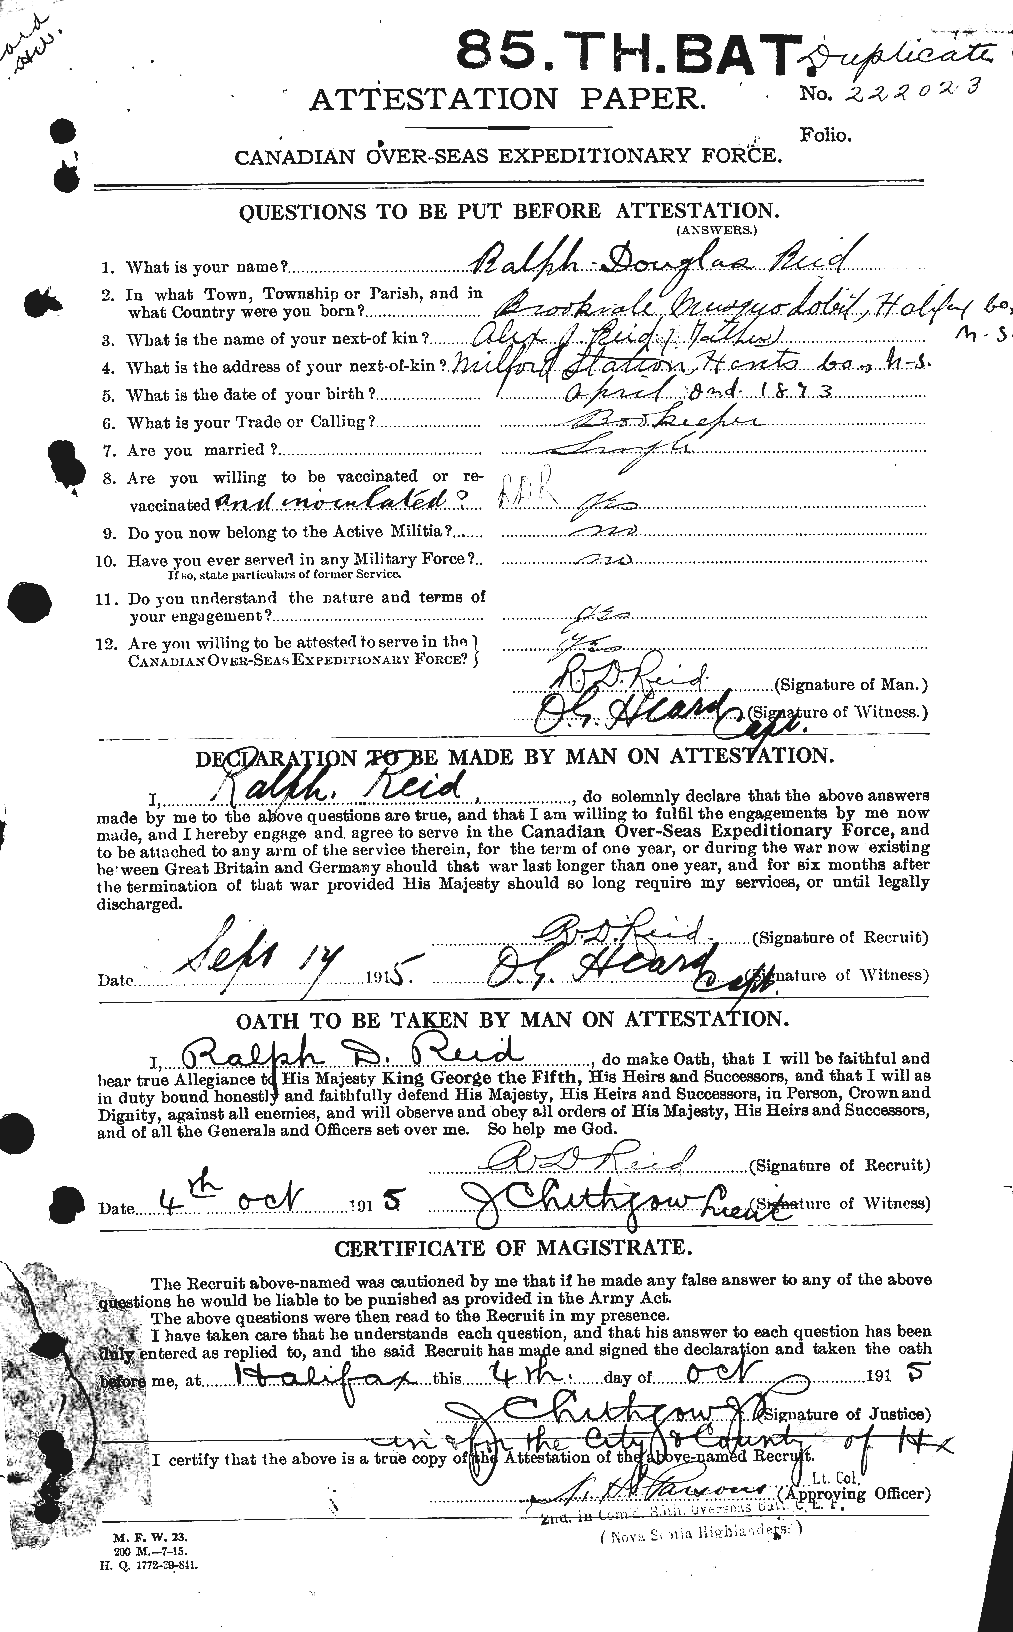 Personnel Records of the First World War - CEF 601849a